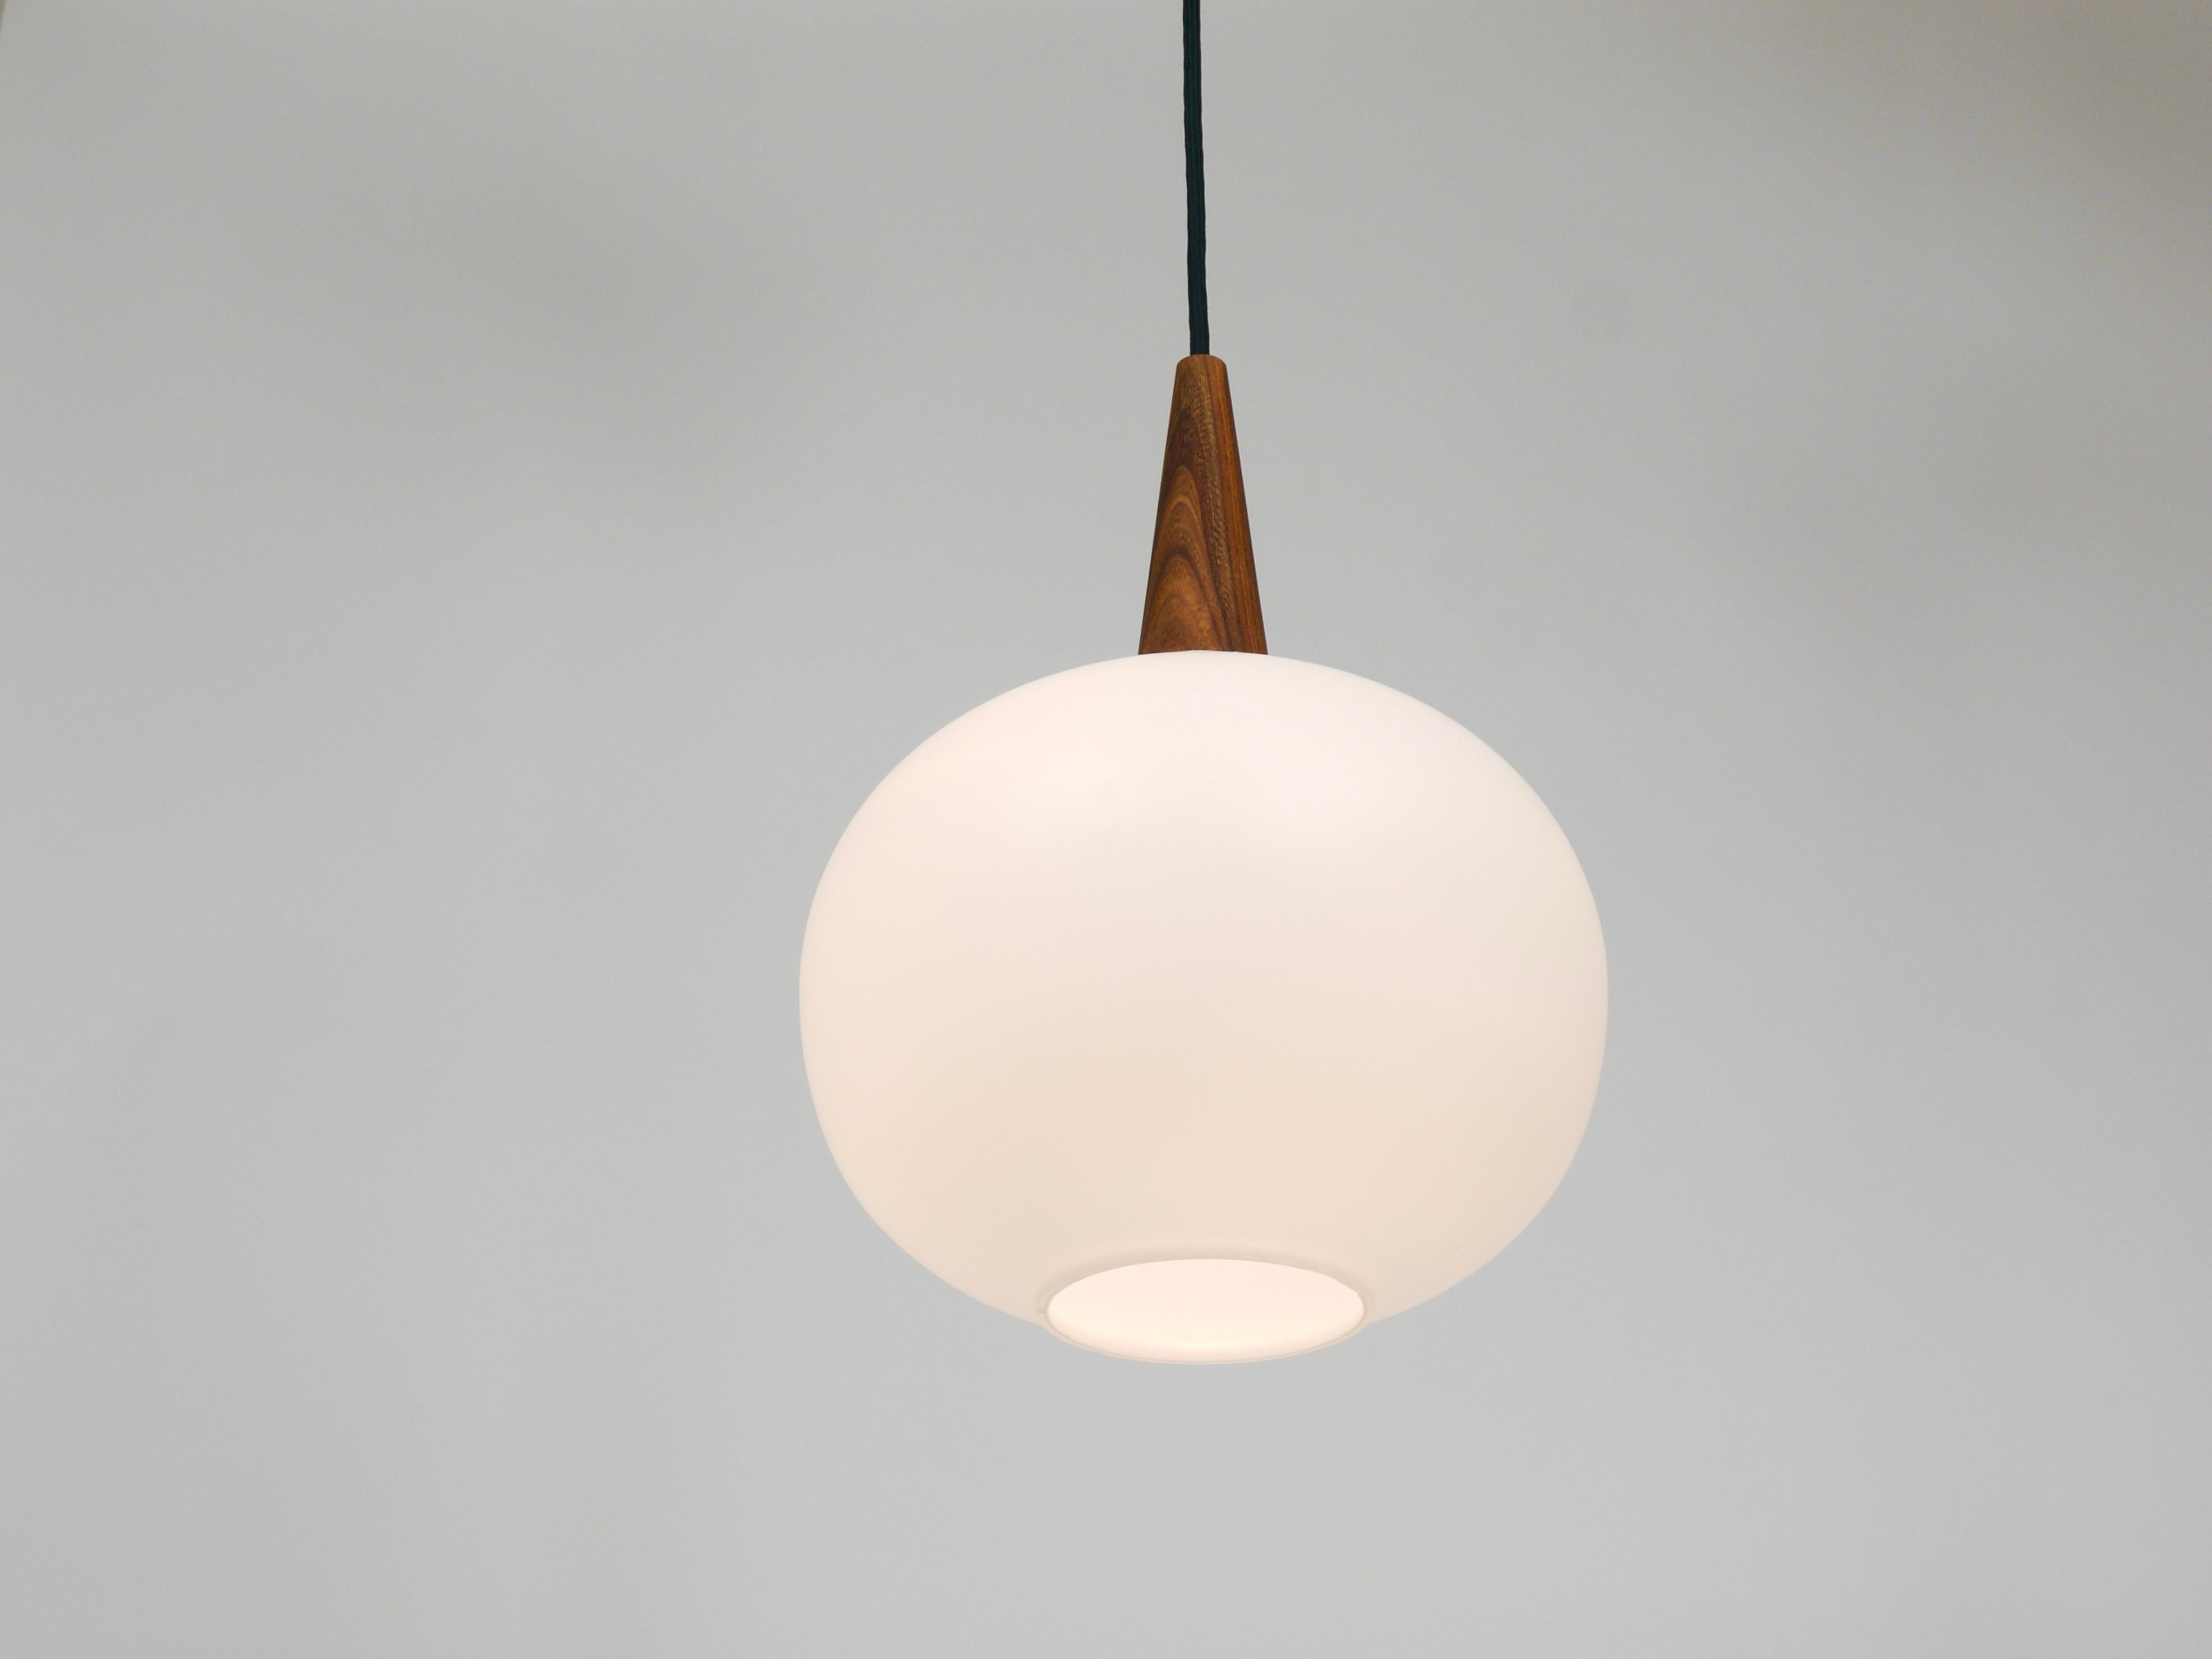 A sleek and elegant Dutch vintage pendant light dating back to the 1950s. This piece was designed by Louis Christiaan Kalff (1897-1976) for Philips in the Netherlands. The lamp features a circular satinized opaline glass lampshade topped with a